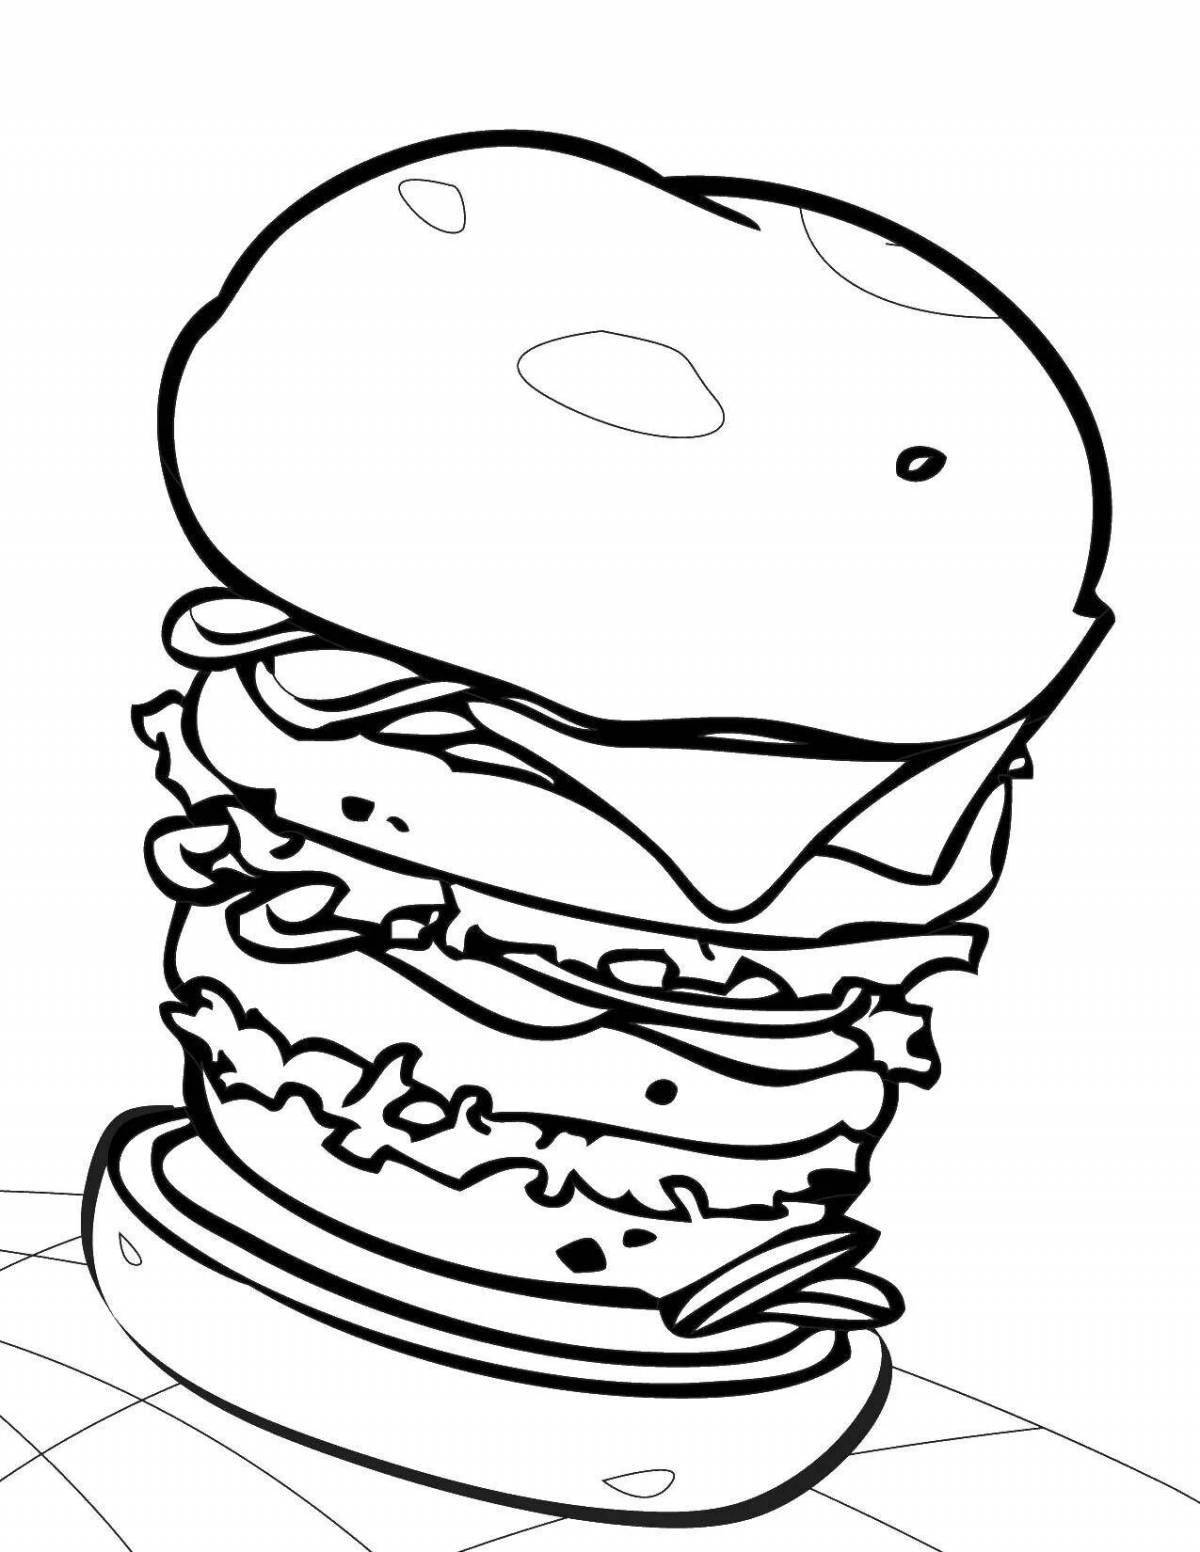 A wonderful burger coloring book for kids